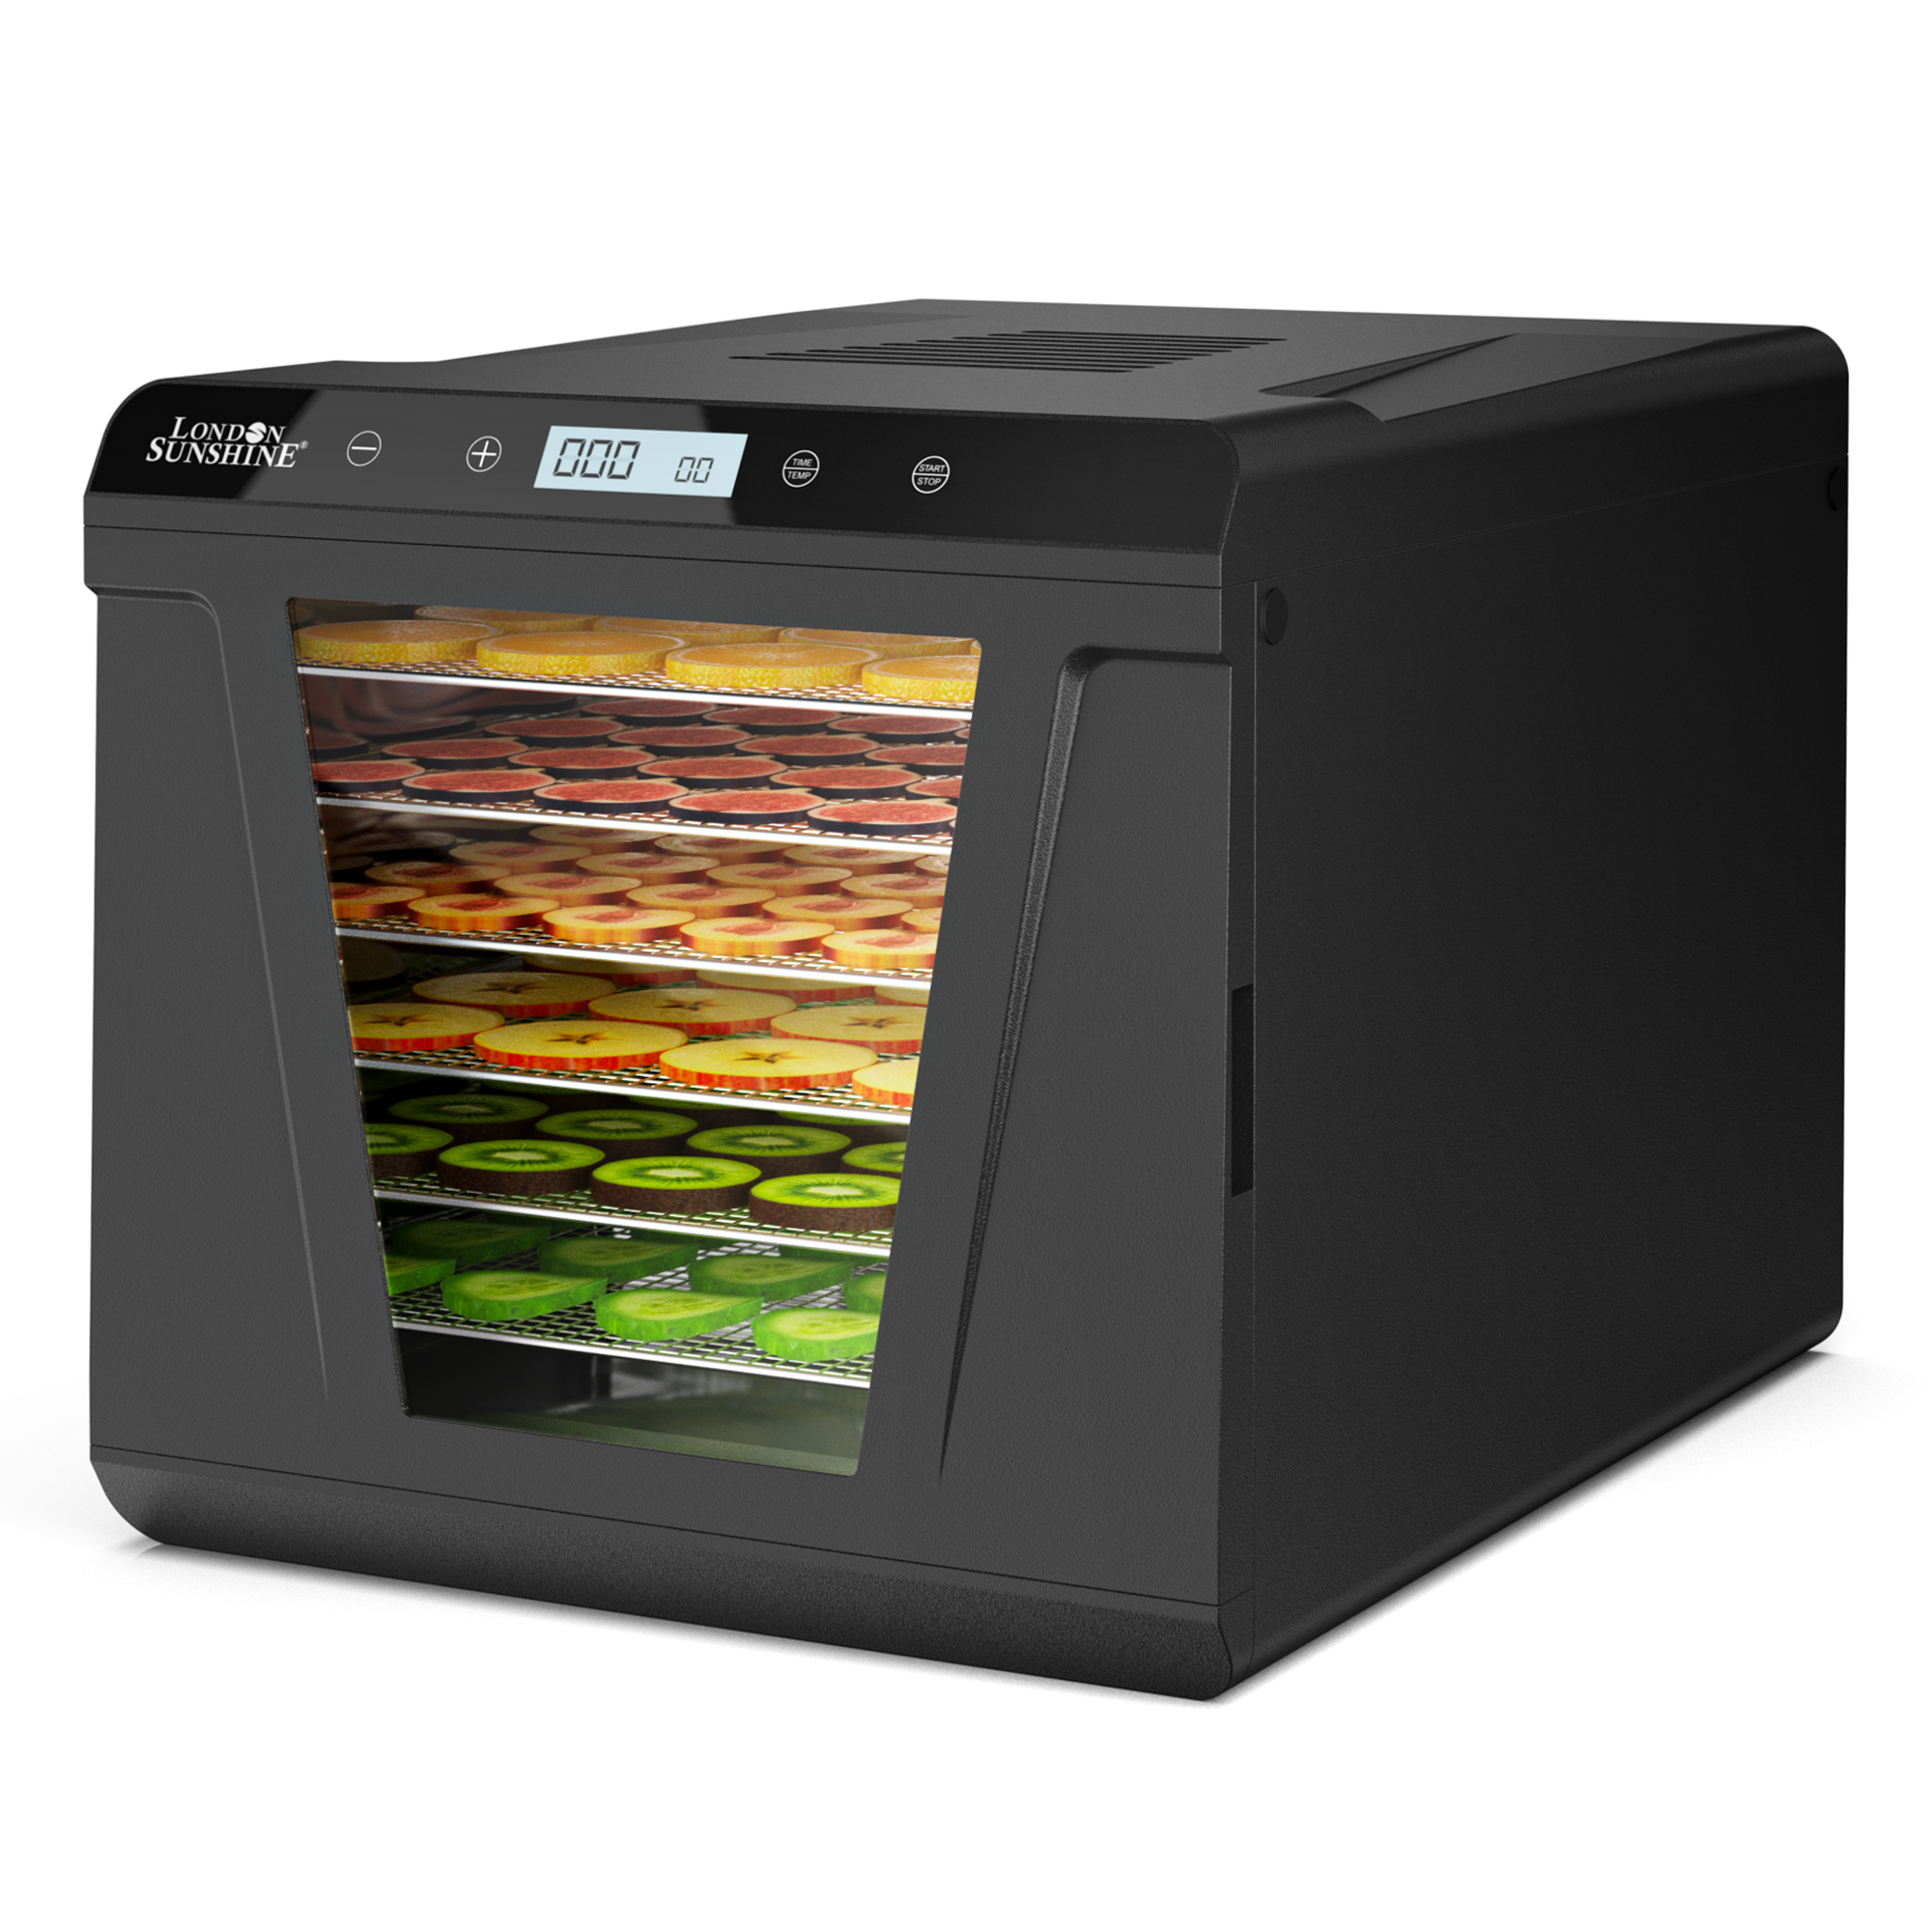 Food Dehydrator Vs. Oven: Which Is Better?